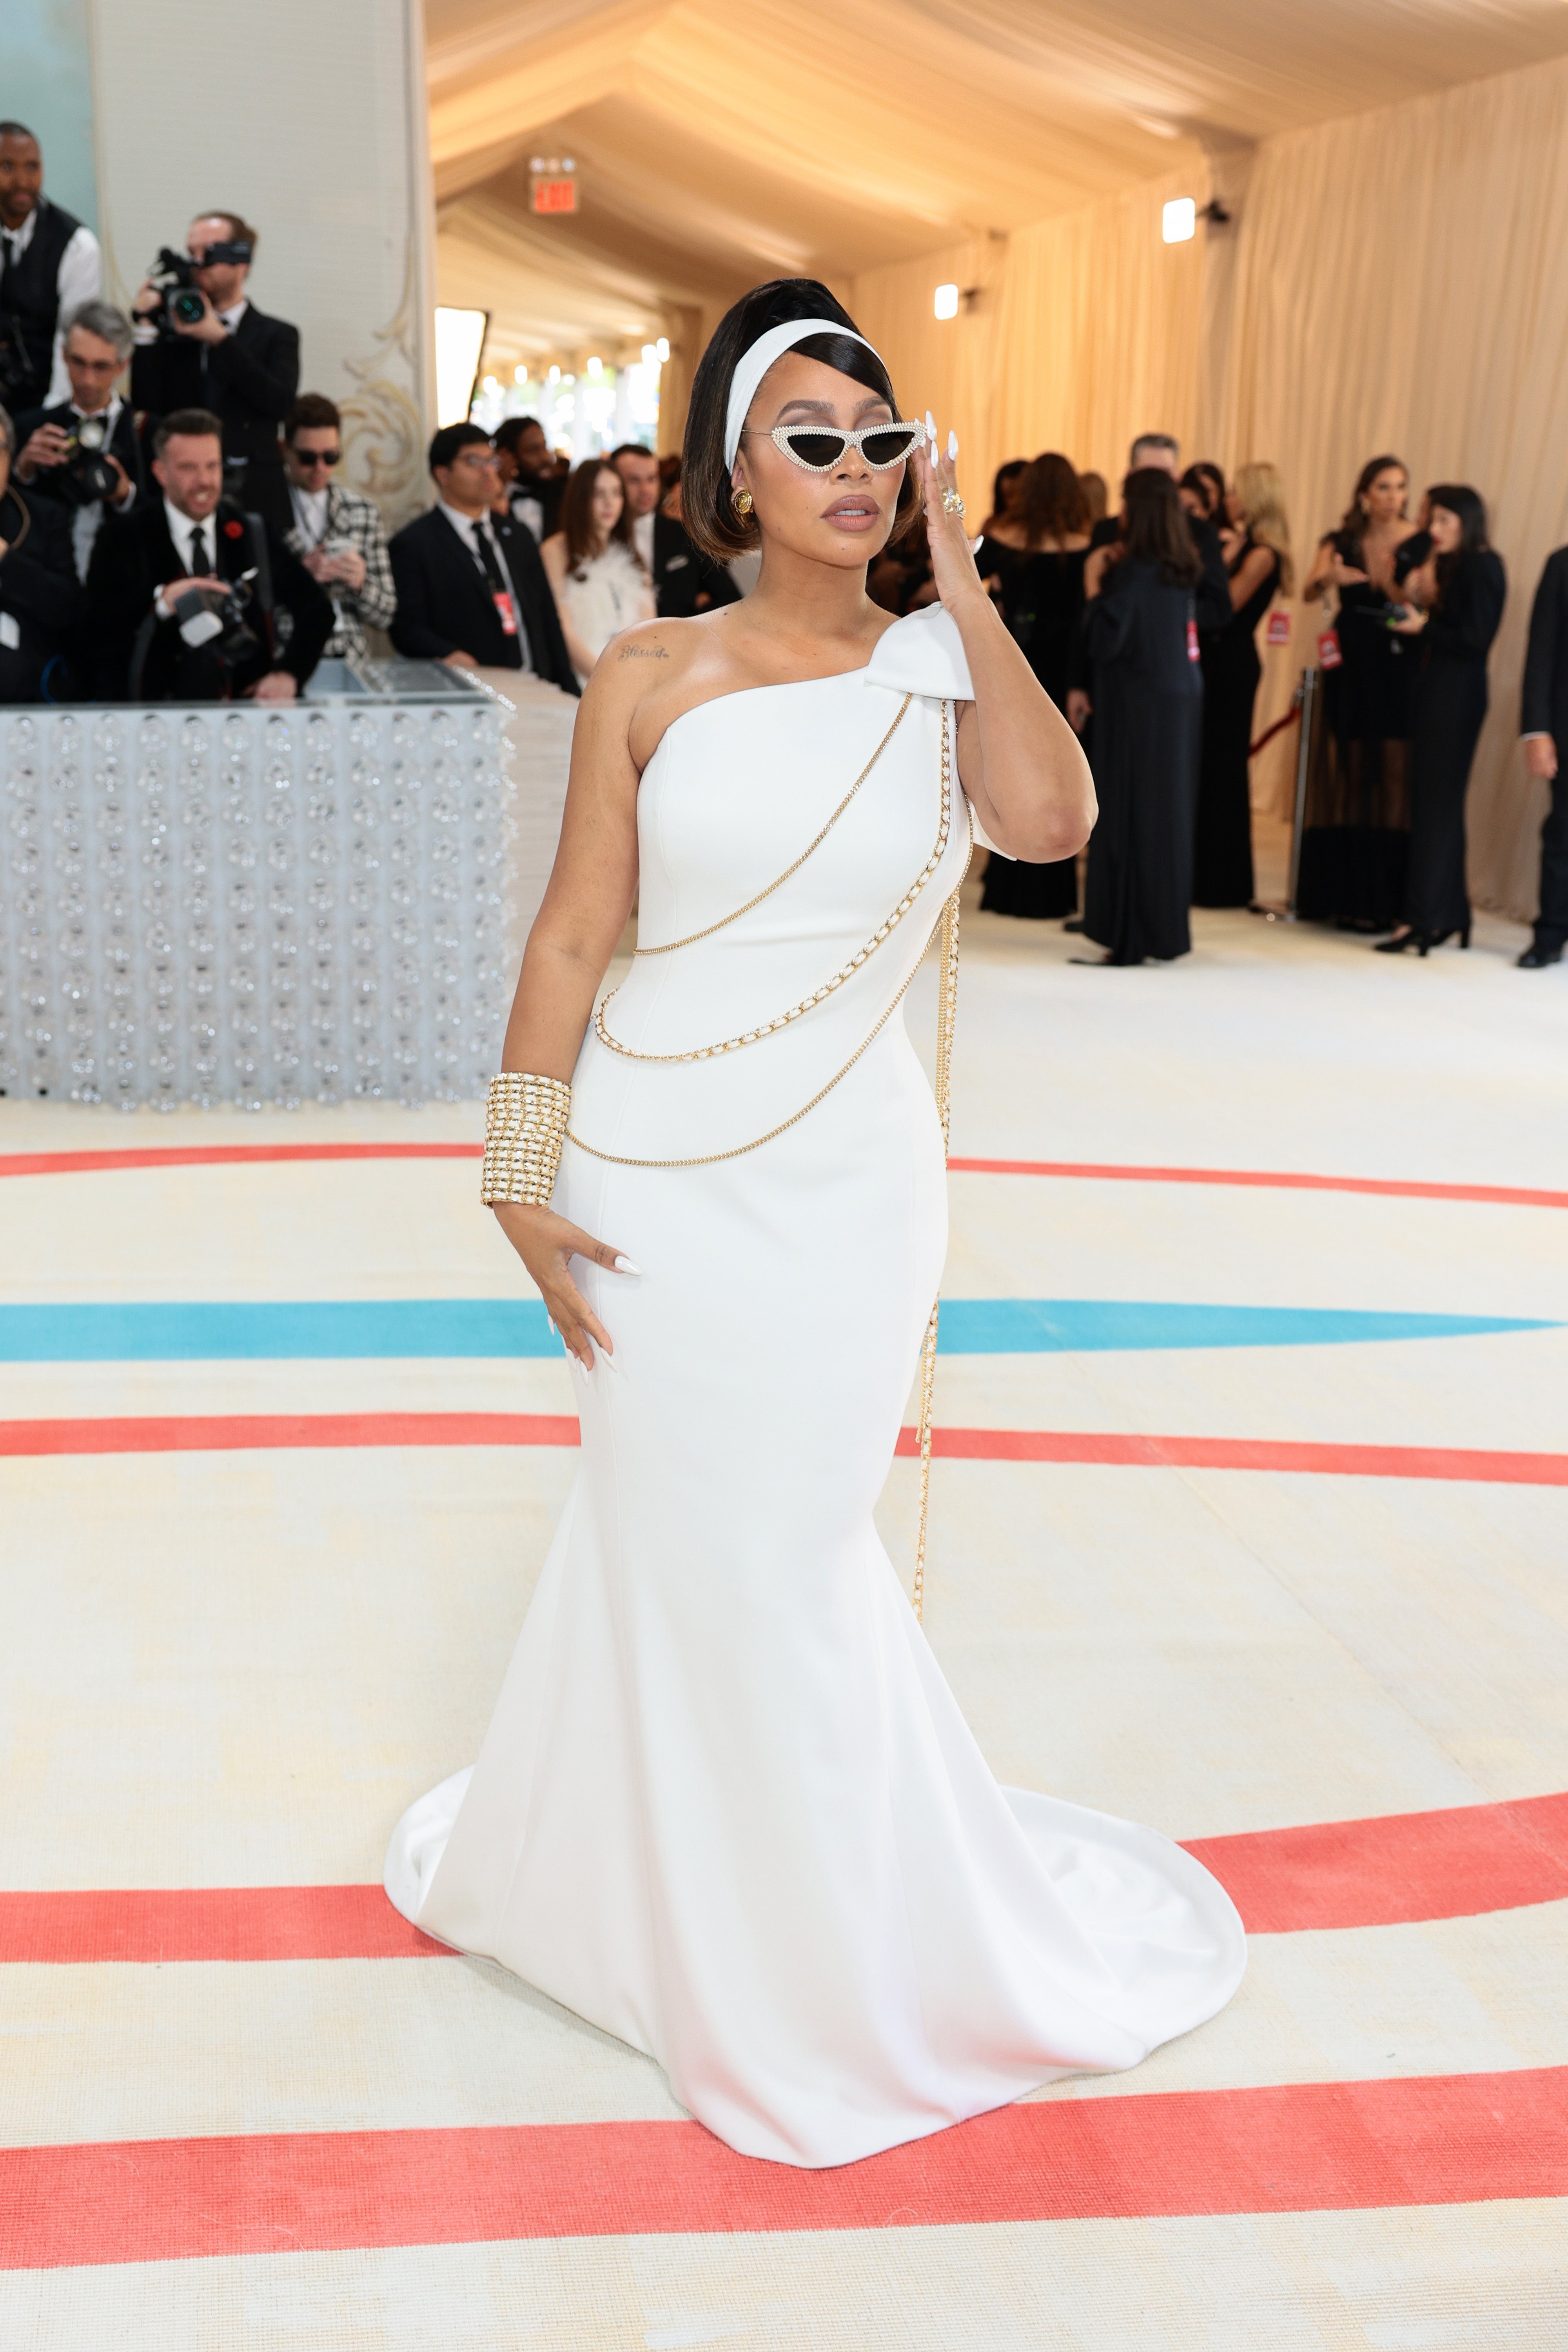 Met Gala: Best dressed stars on the red carpet, from Kim Kardashian to Anne  Hathaway